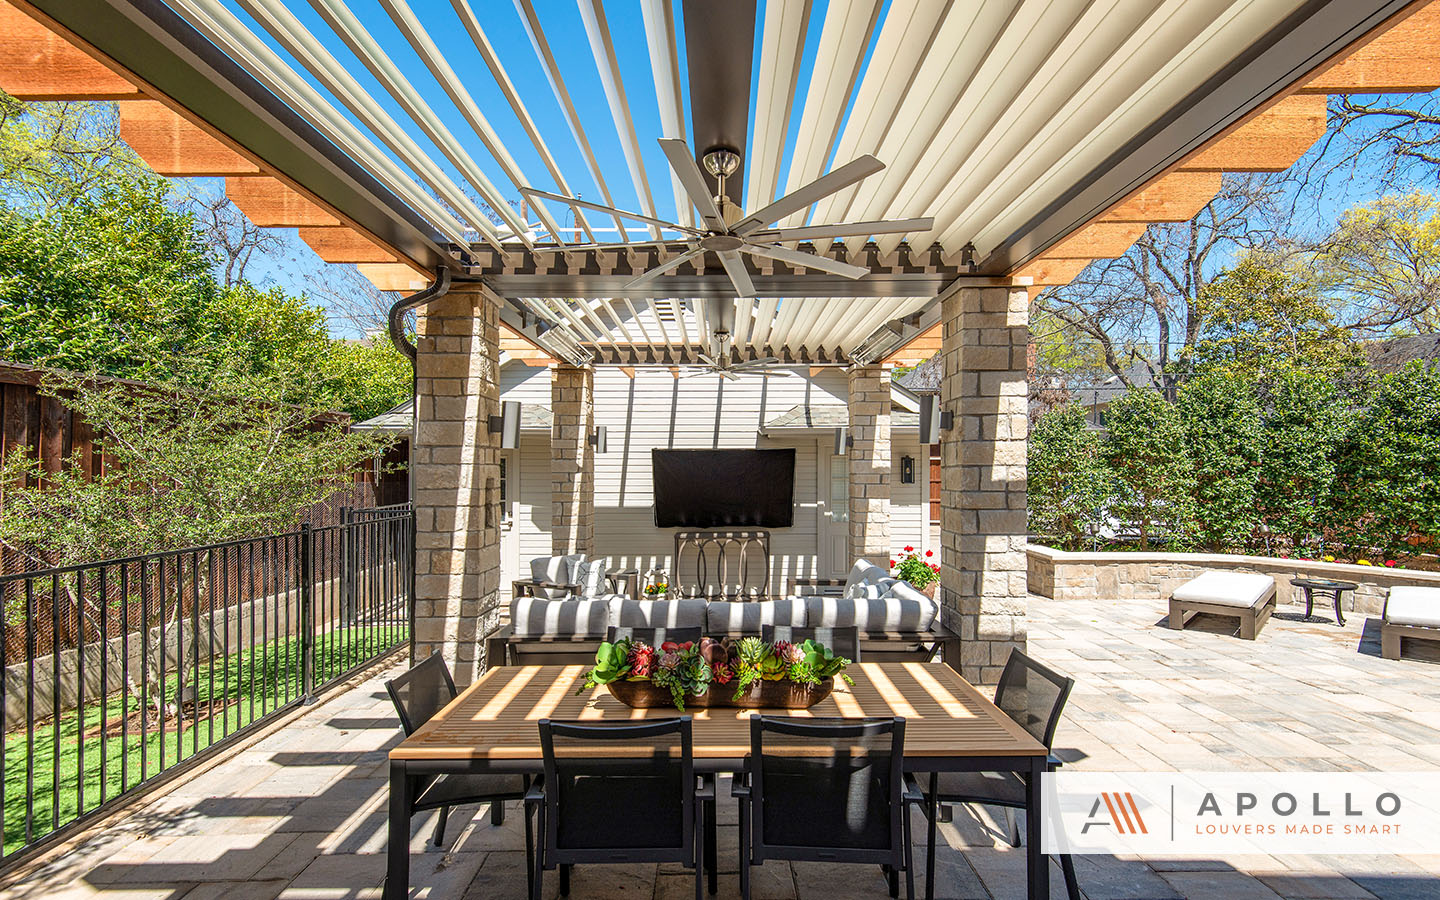 Apollo louvered pergola over an outdoor seating area with dappled lighting, enhancing the cozy ambience.